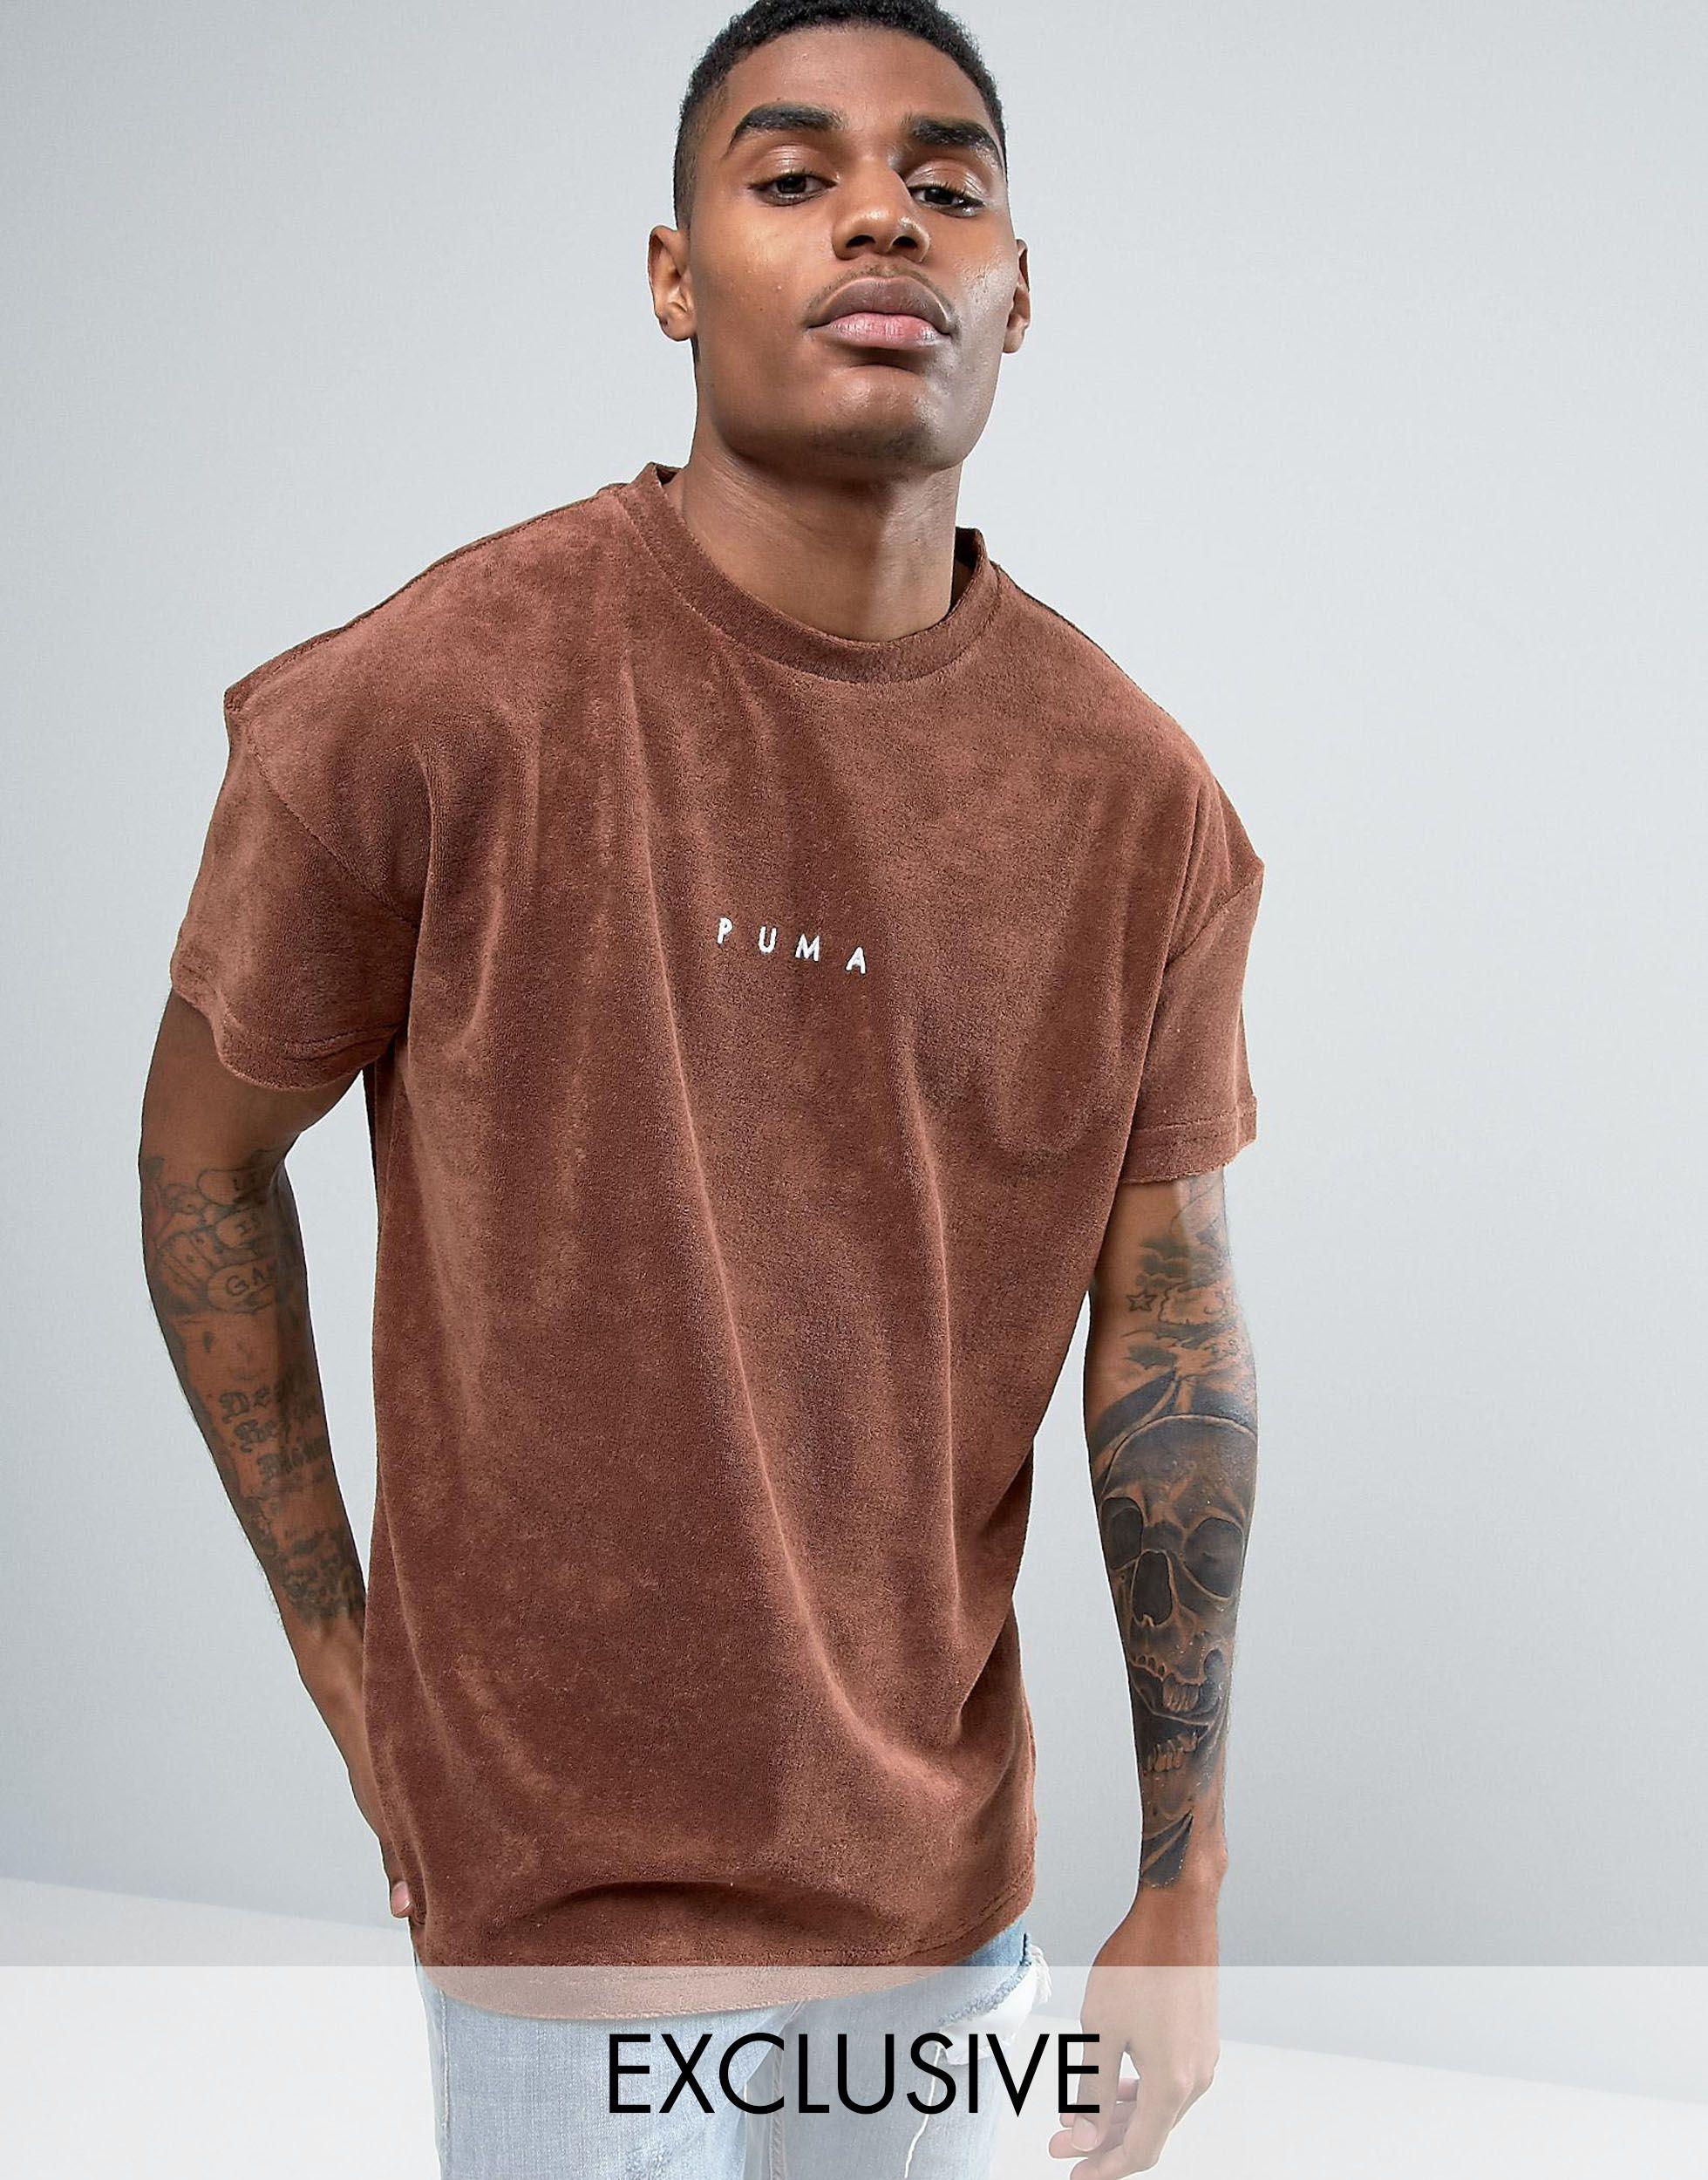 PUMA Towelling T-shirt In Brown Exclusive To Asos 57533302 for Men | Lyst